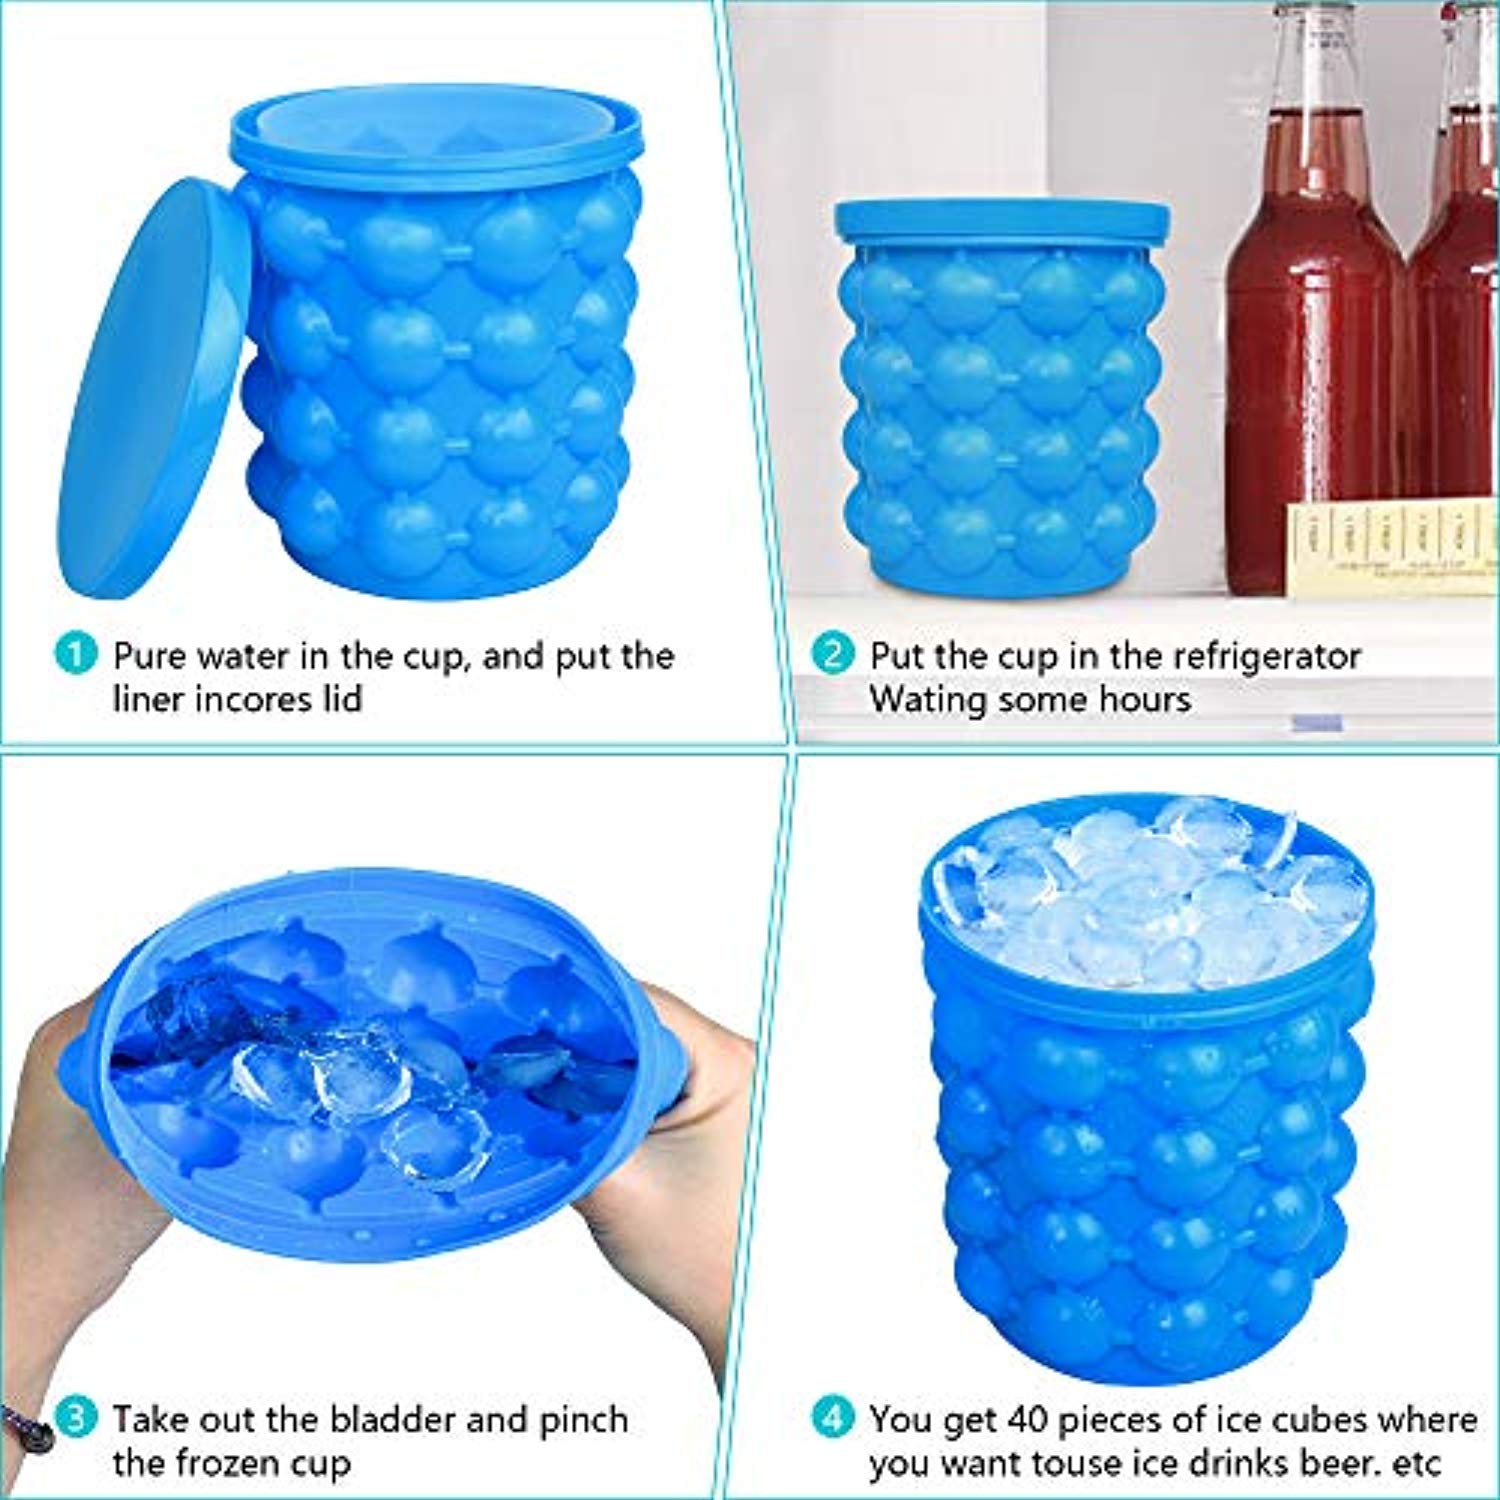 Space Saving Ice Cube Maker,Silicon Ice Cube Maker